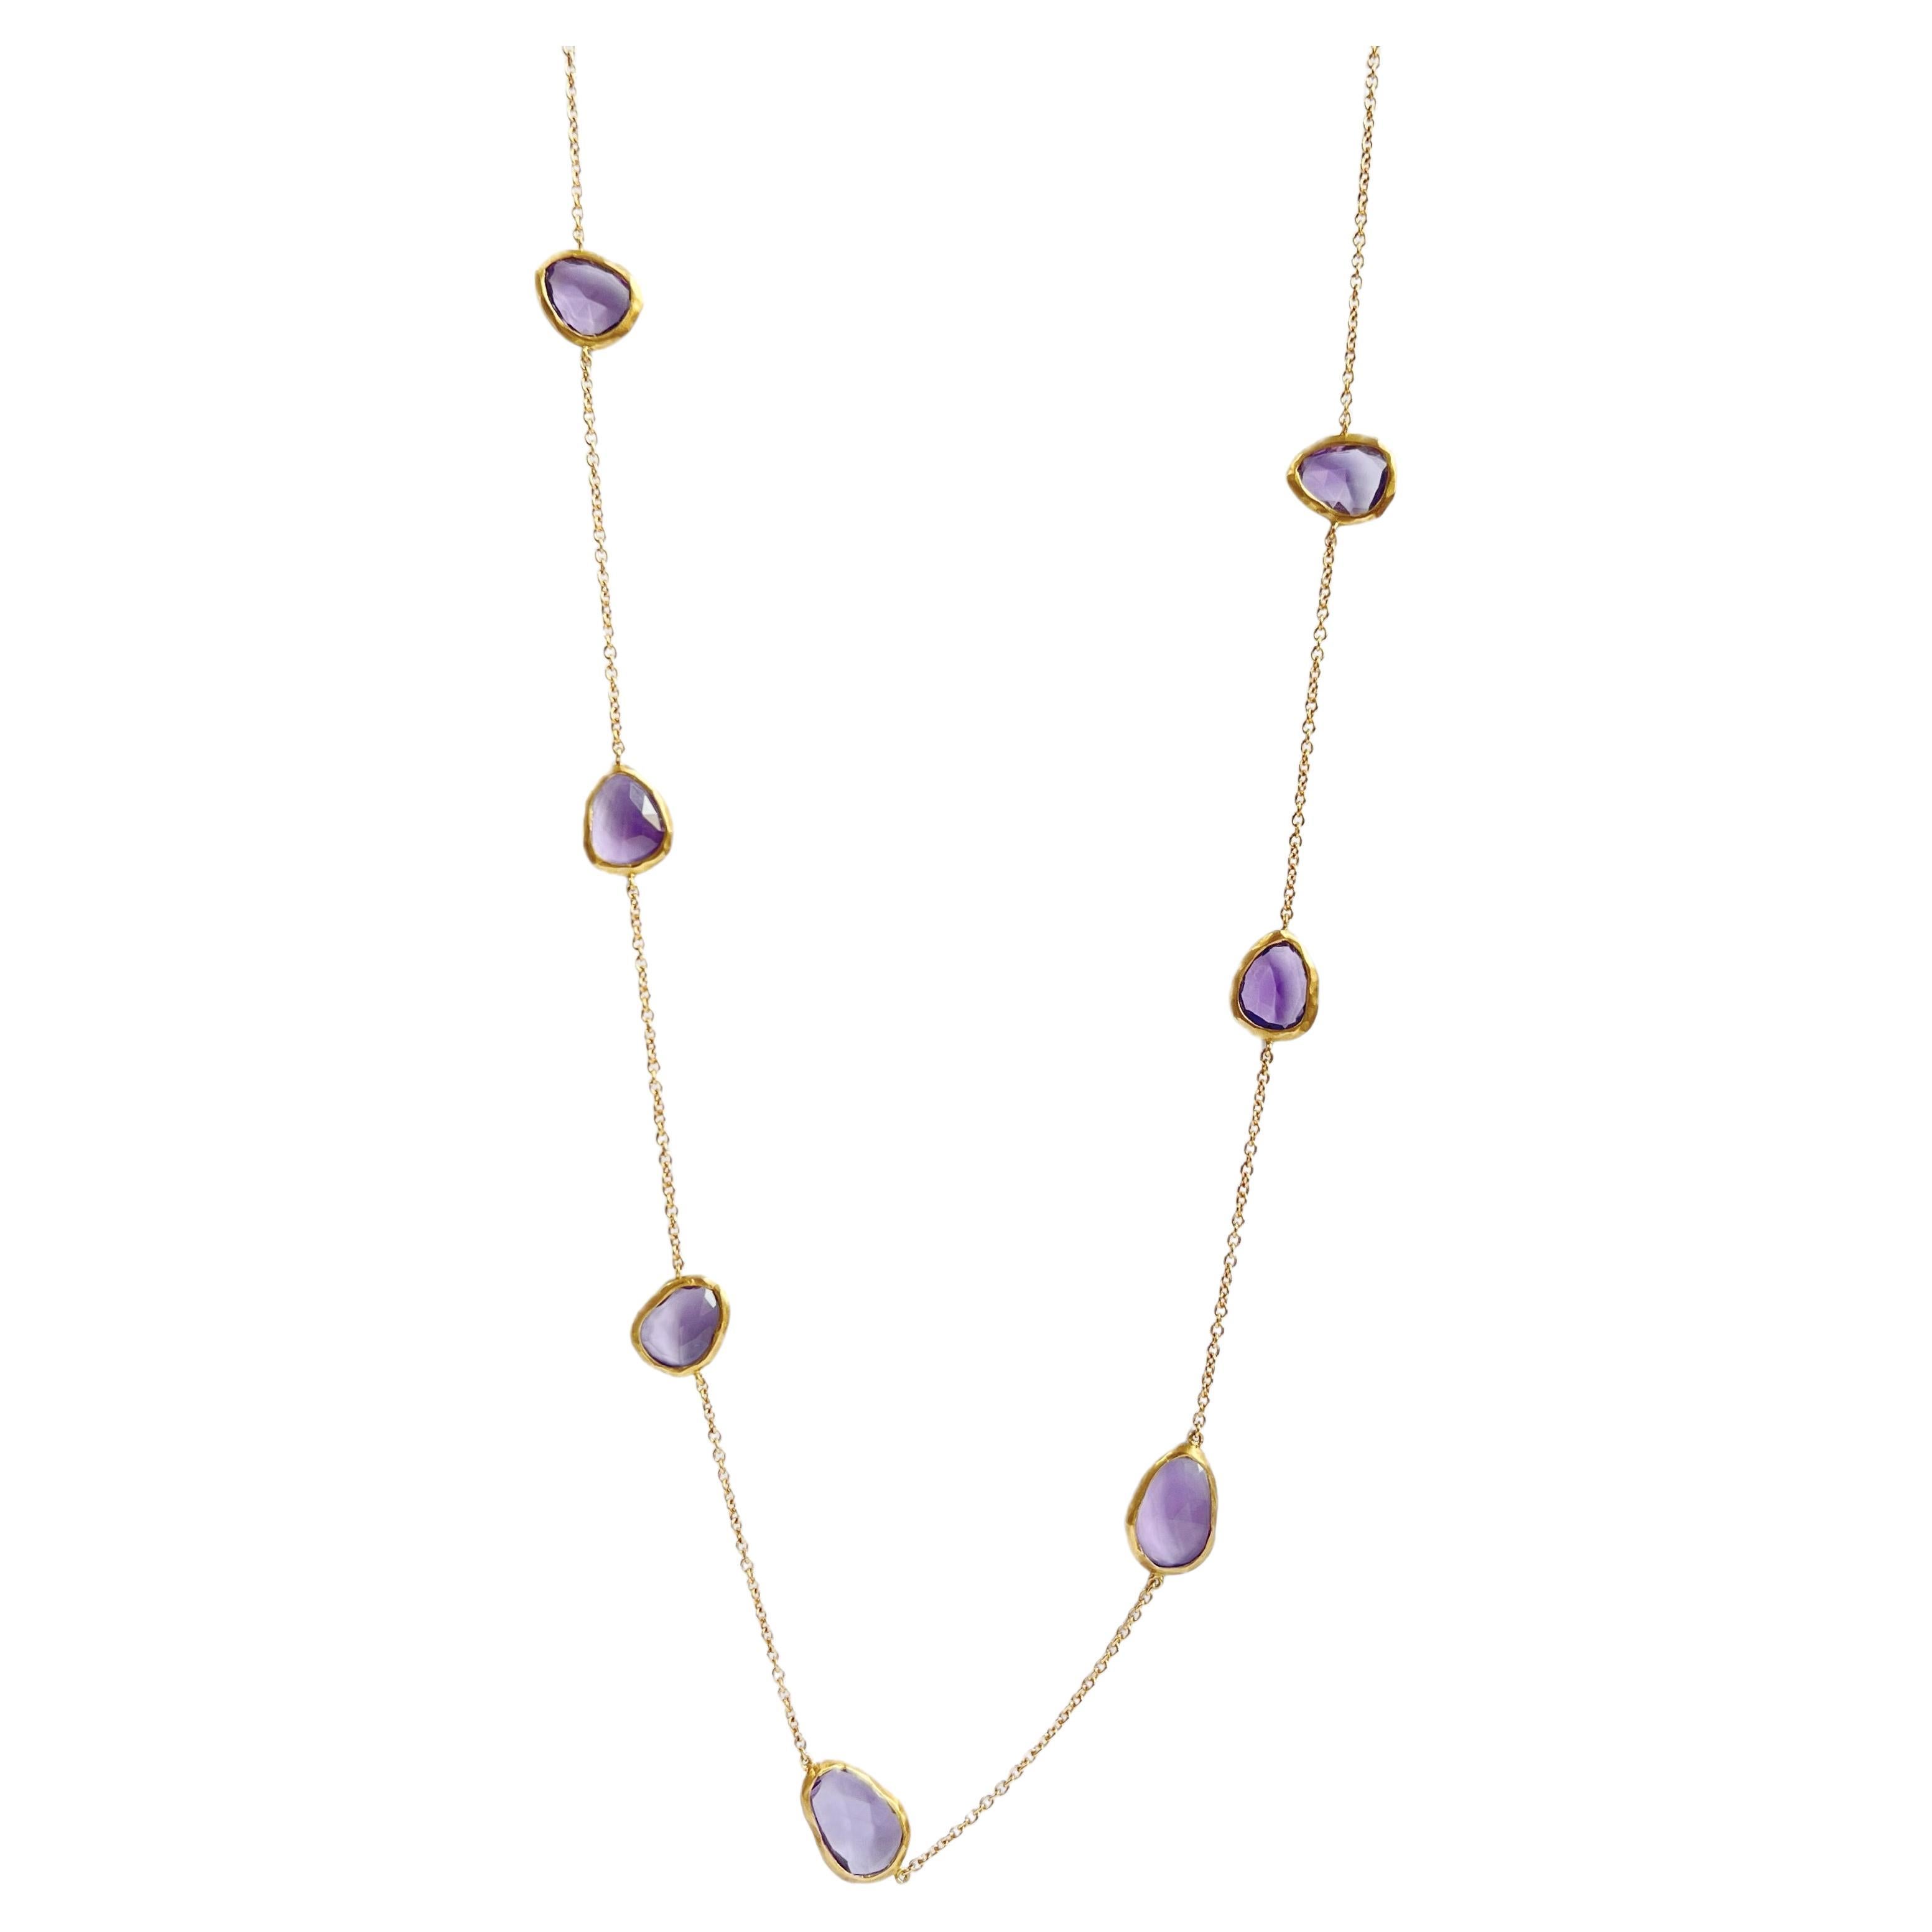 18kt Pink Gold Necklace chanel style chain with Amethyst gems